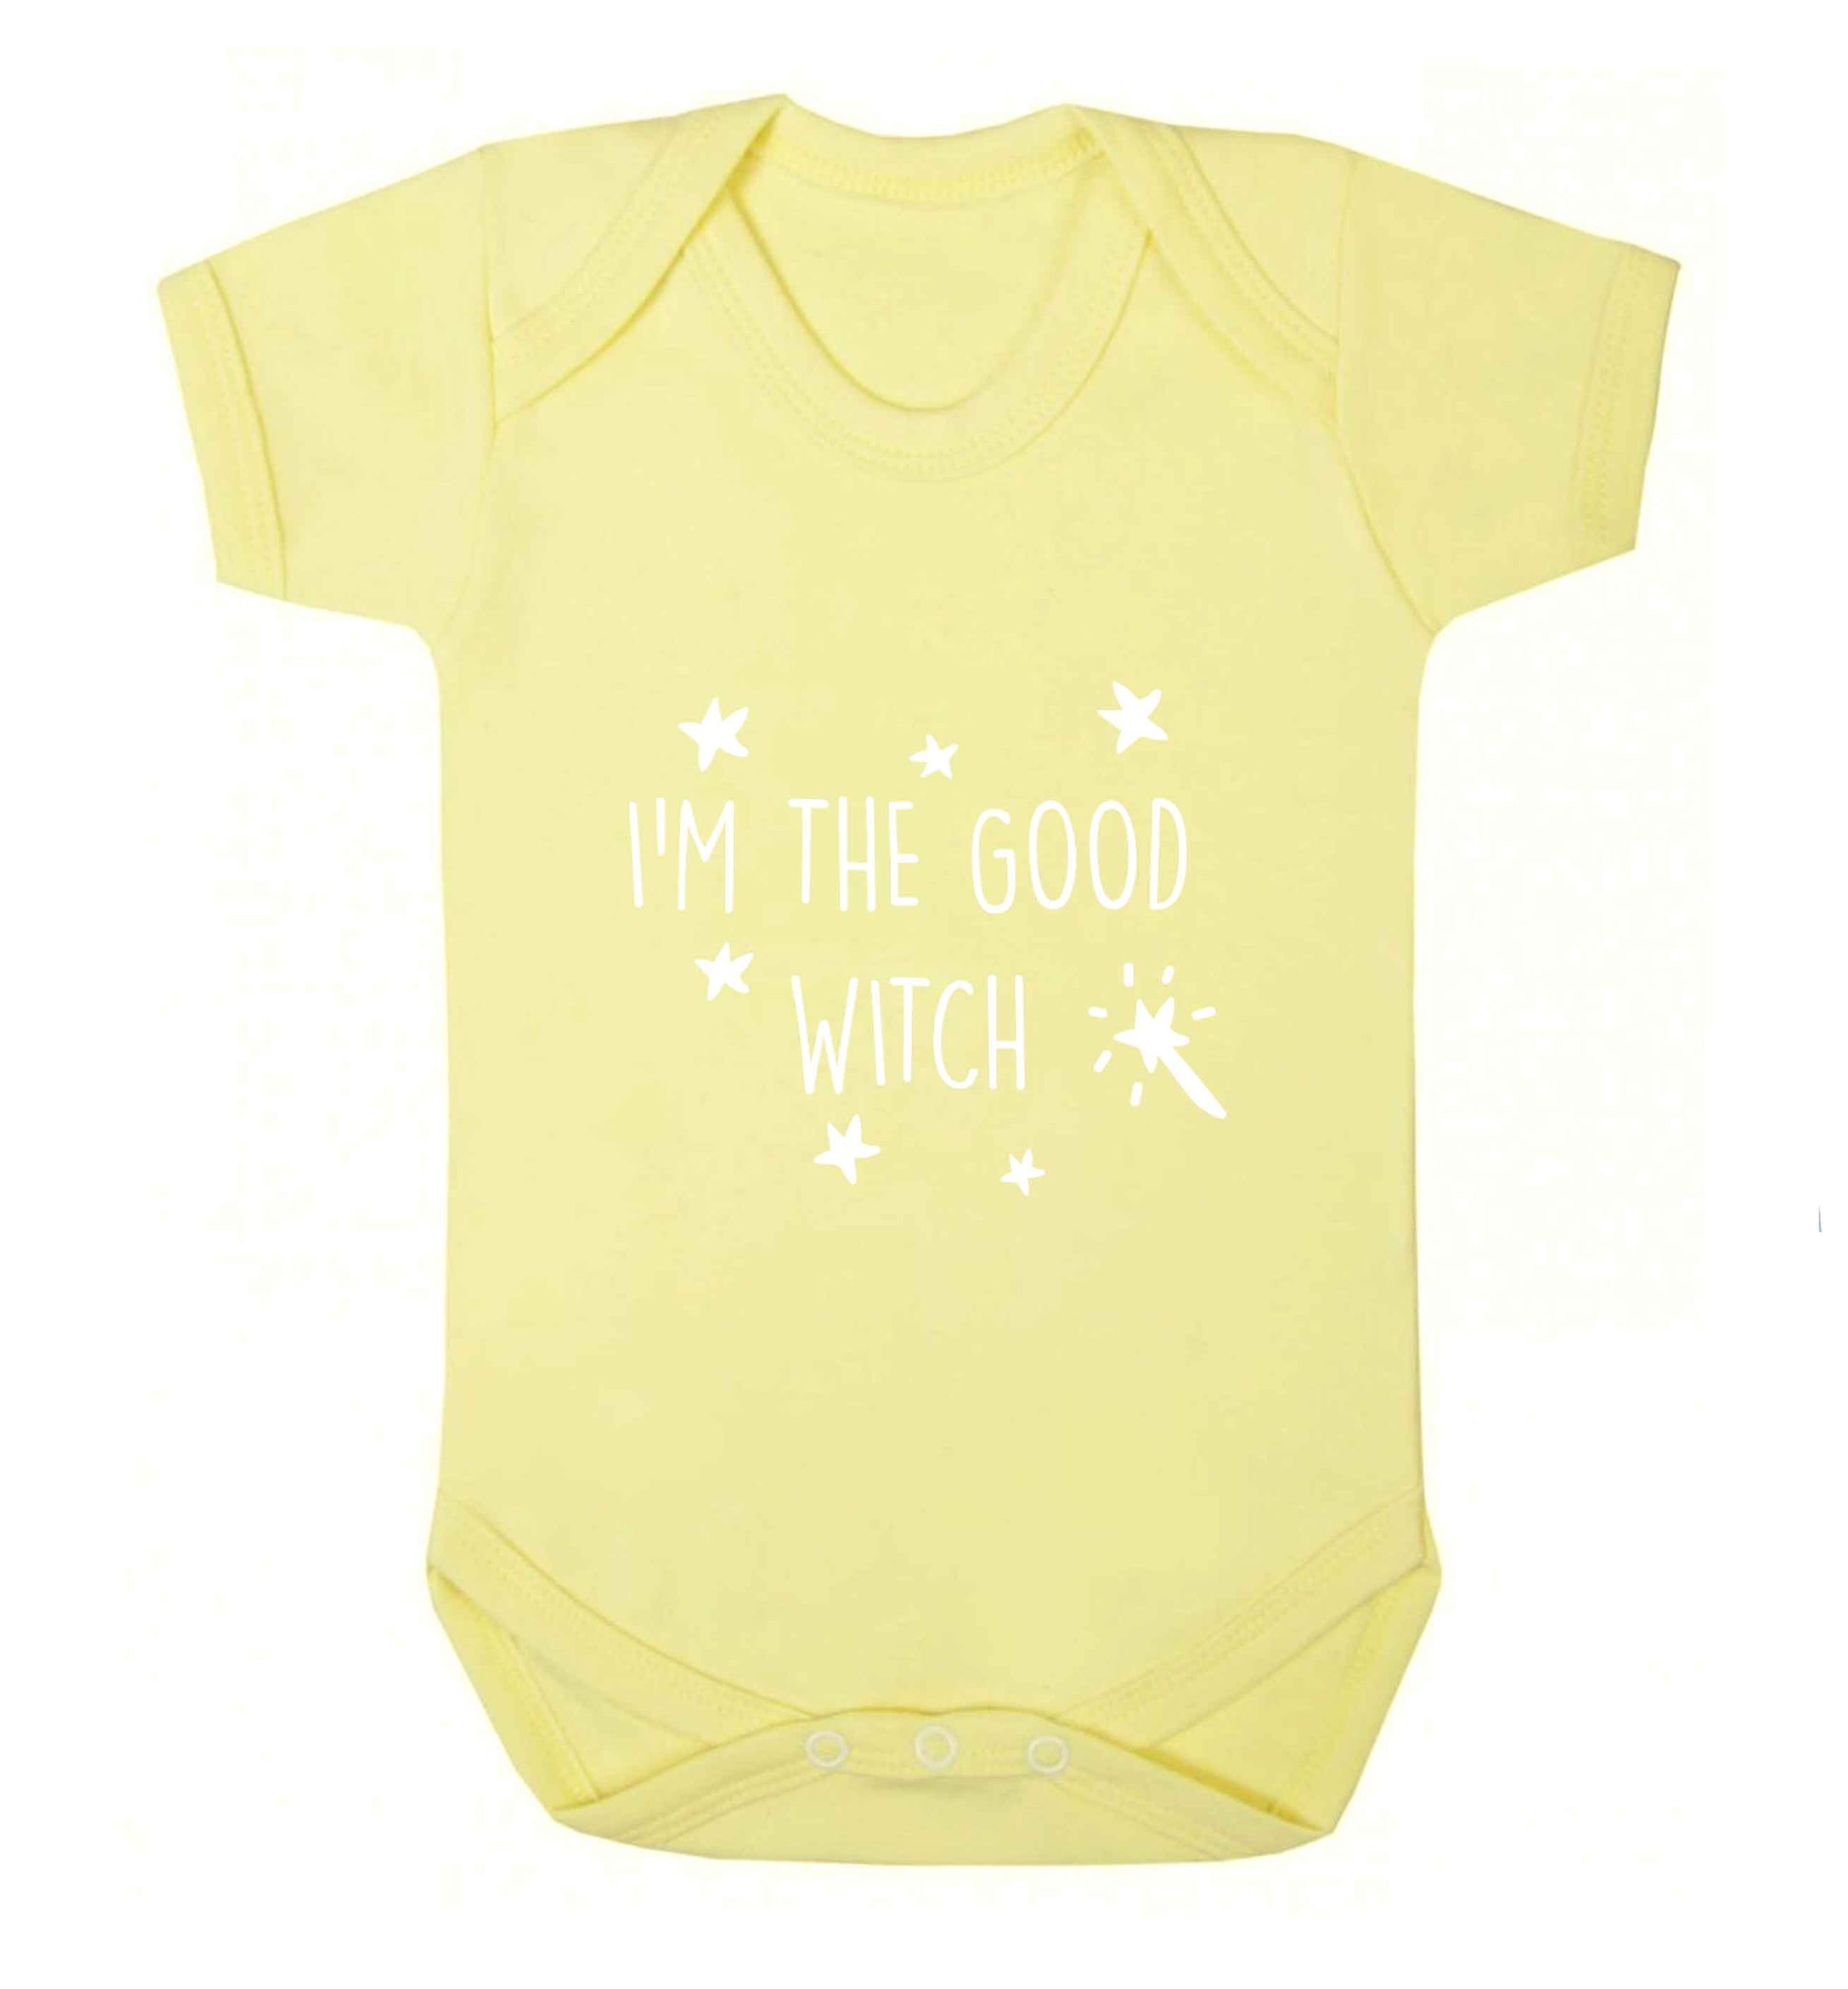 Good witch baby vest pale yellow 18-24 months